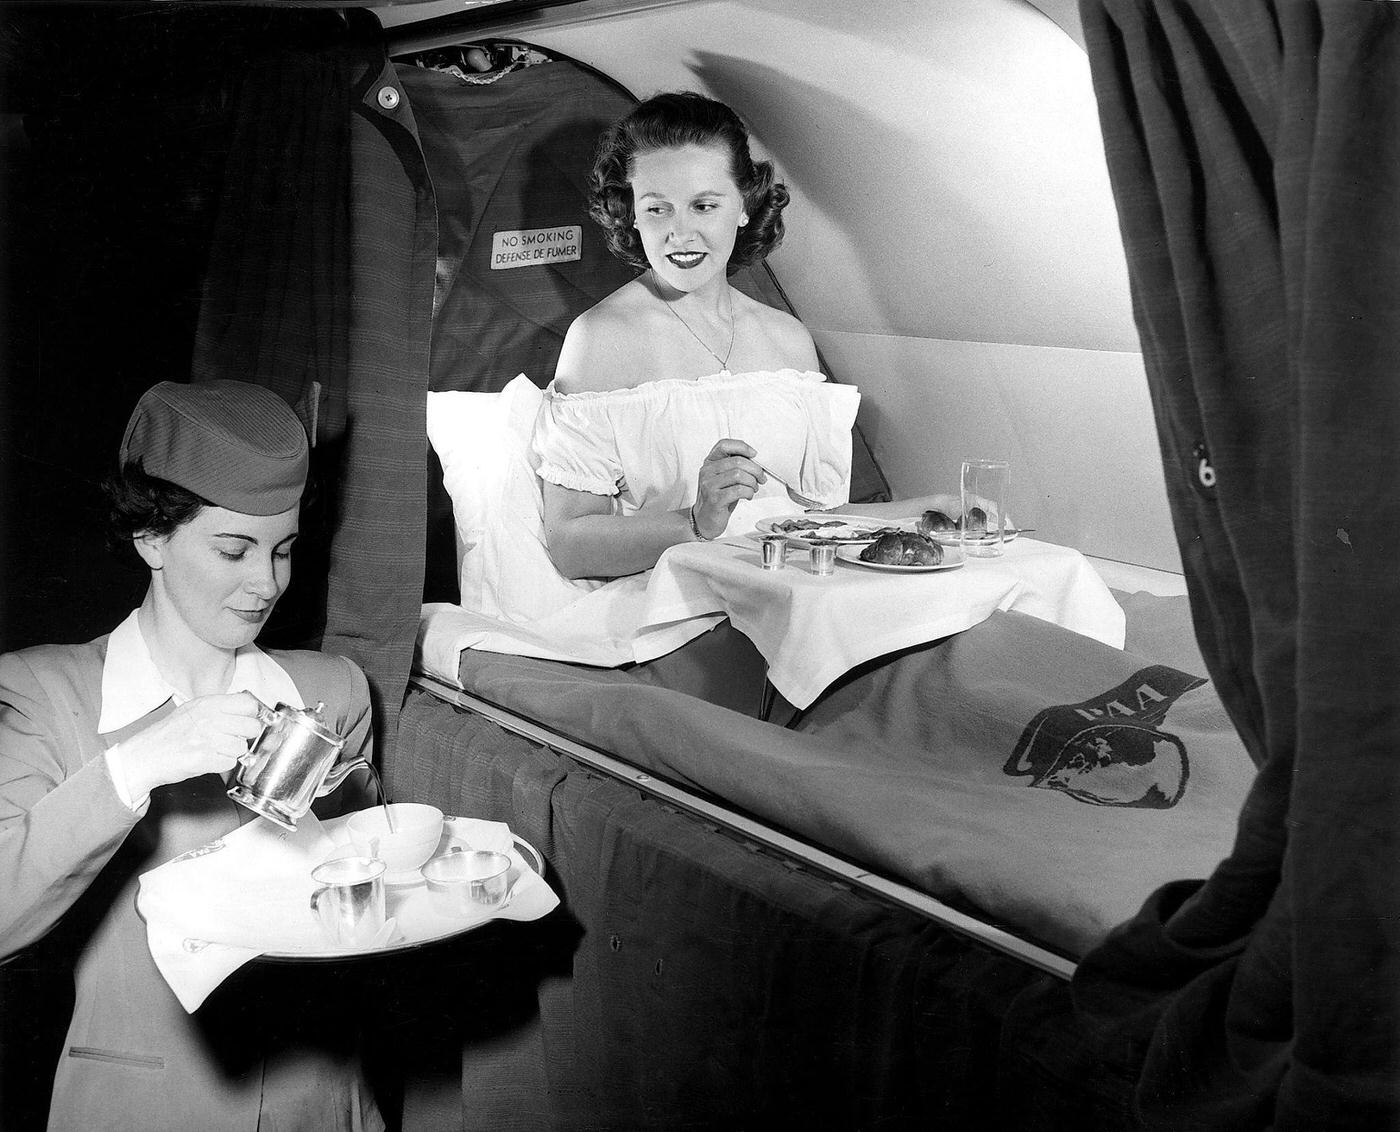 A PAA Atlantic Division stewardess serves breakfast in bed to a female passenger during a transatlantic flight in 1952.